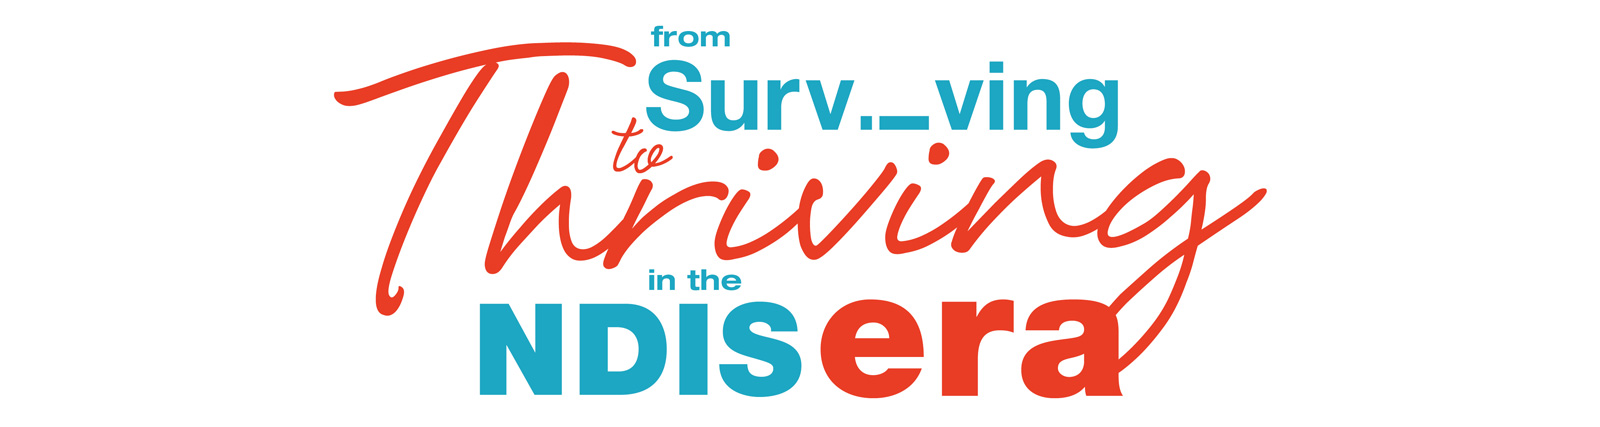 From Surviving to Thriving in the NDIS Era 2018